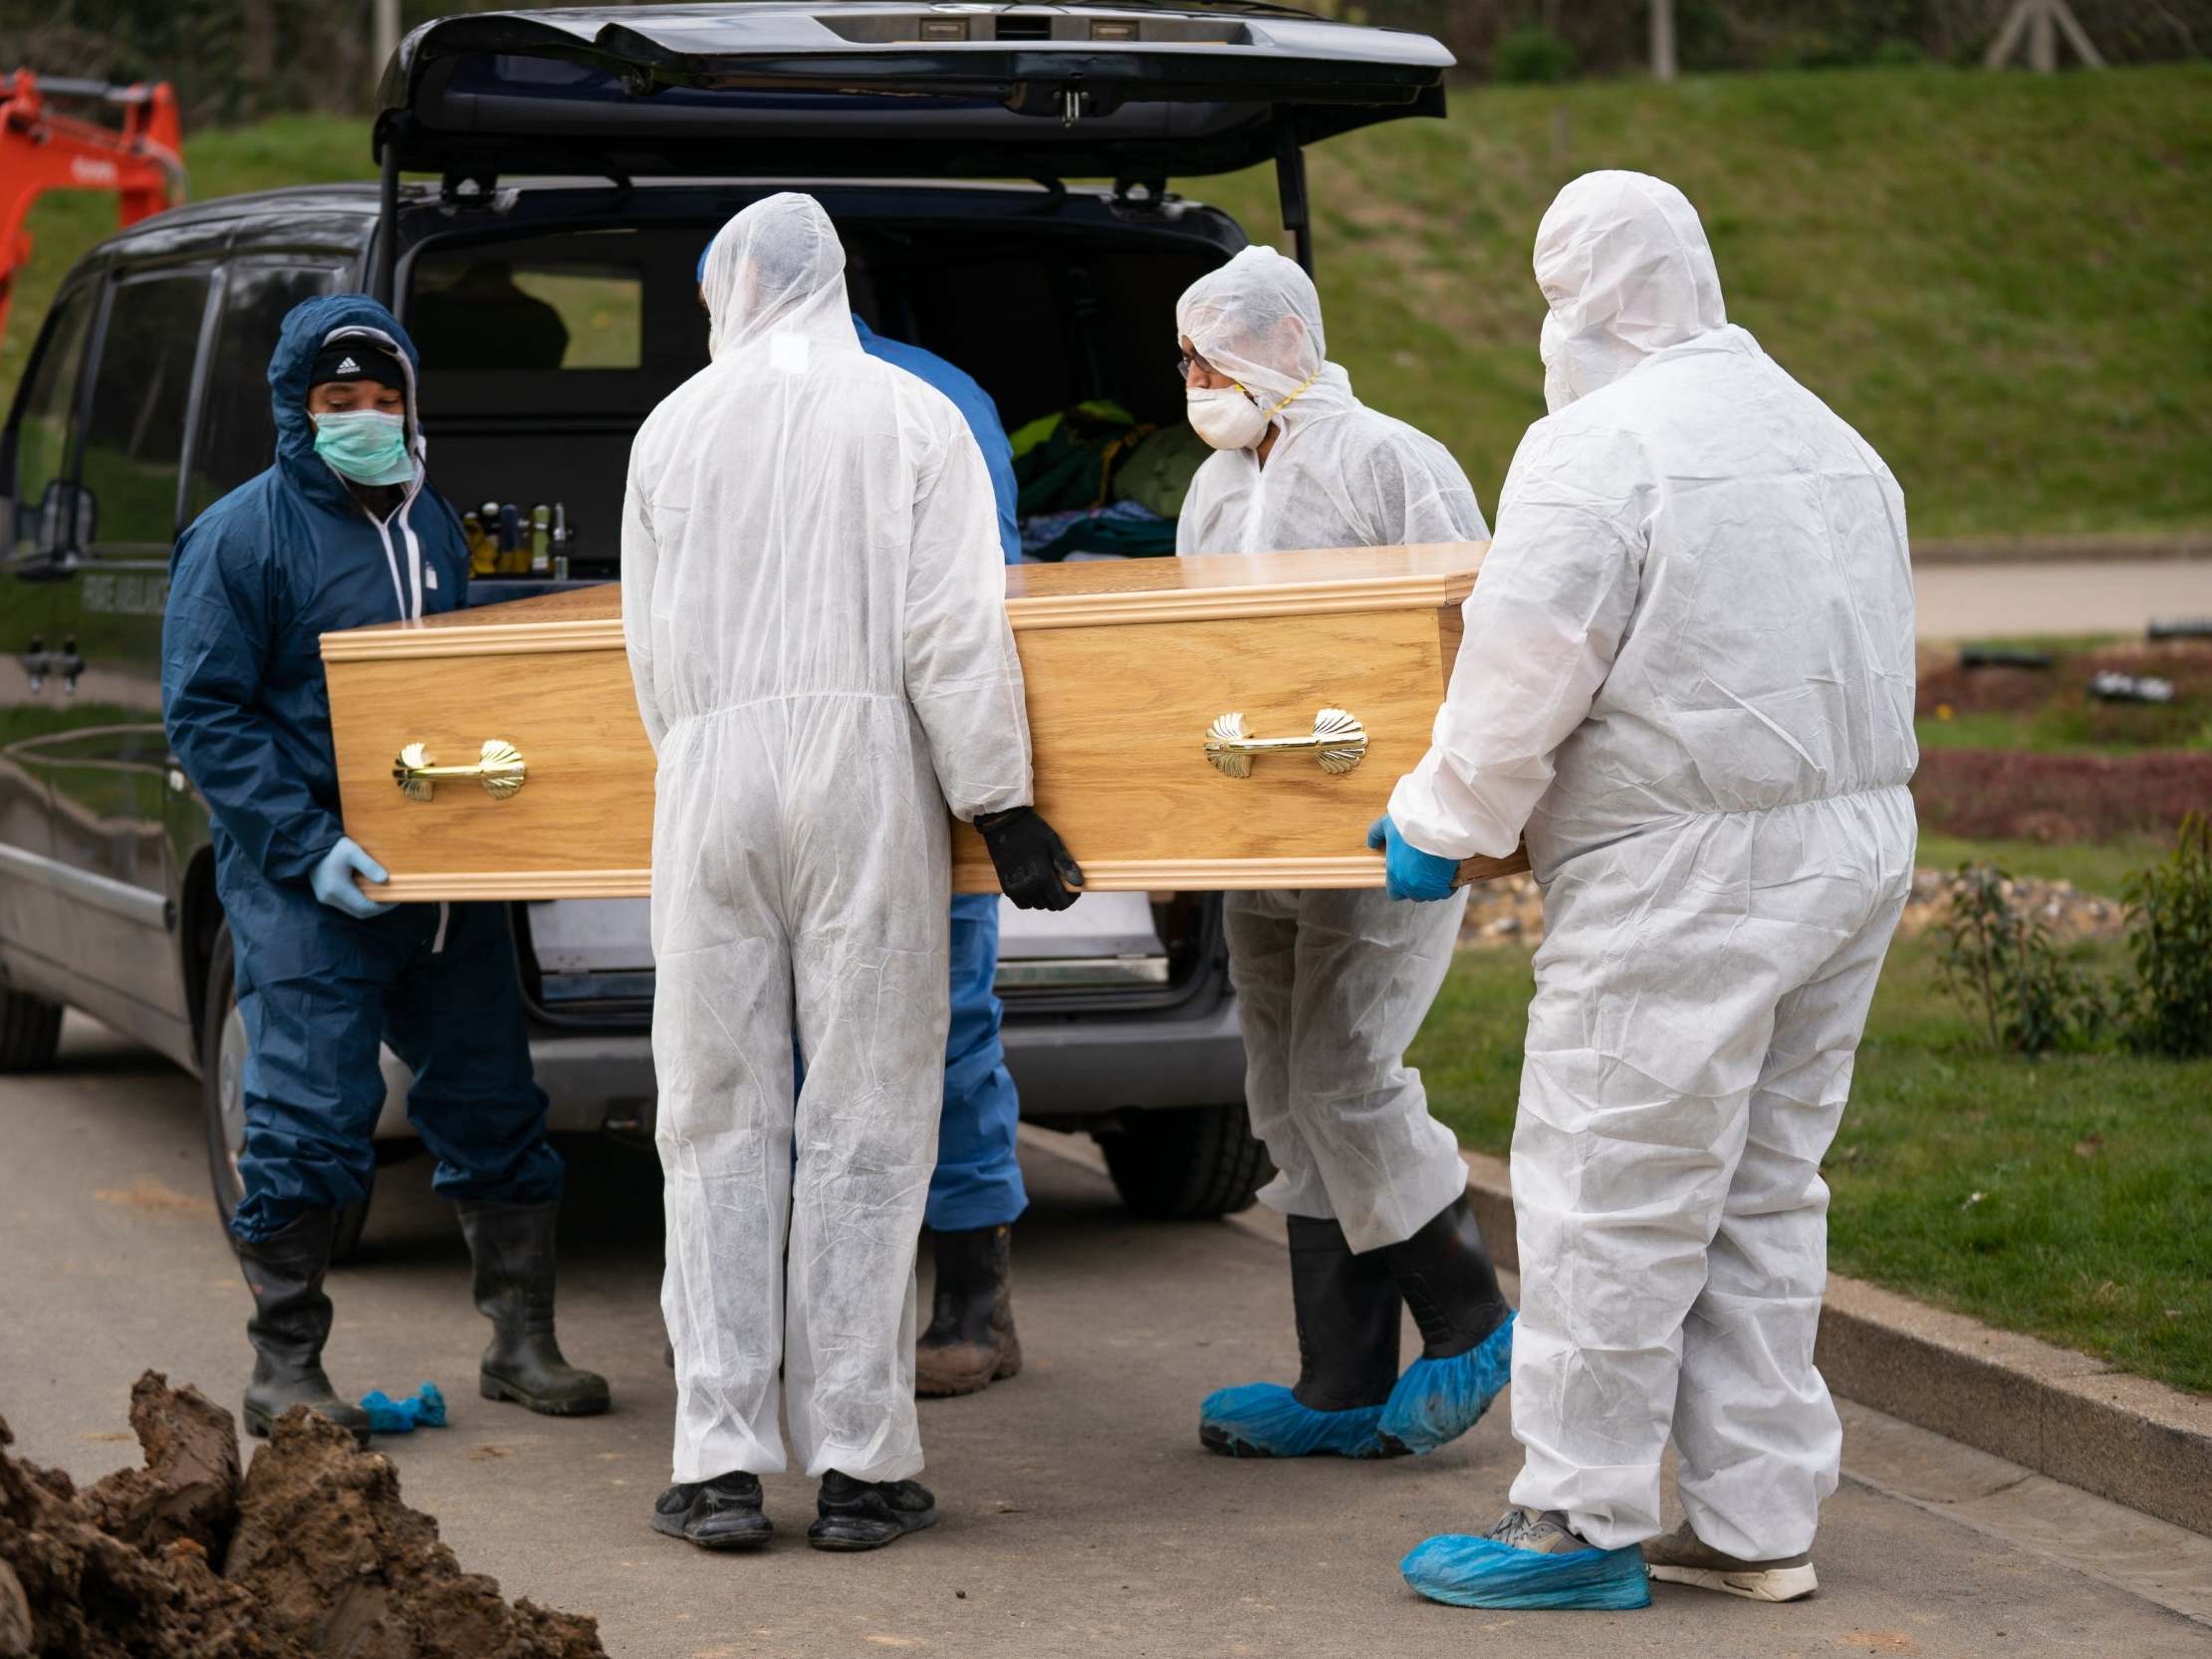 Six people die from coronavirus after attending same funeral in South Carolina thumbnail